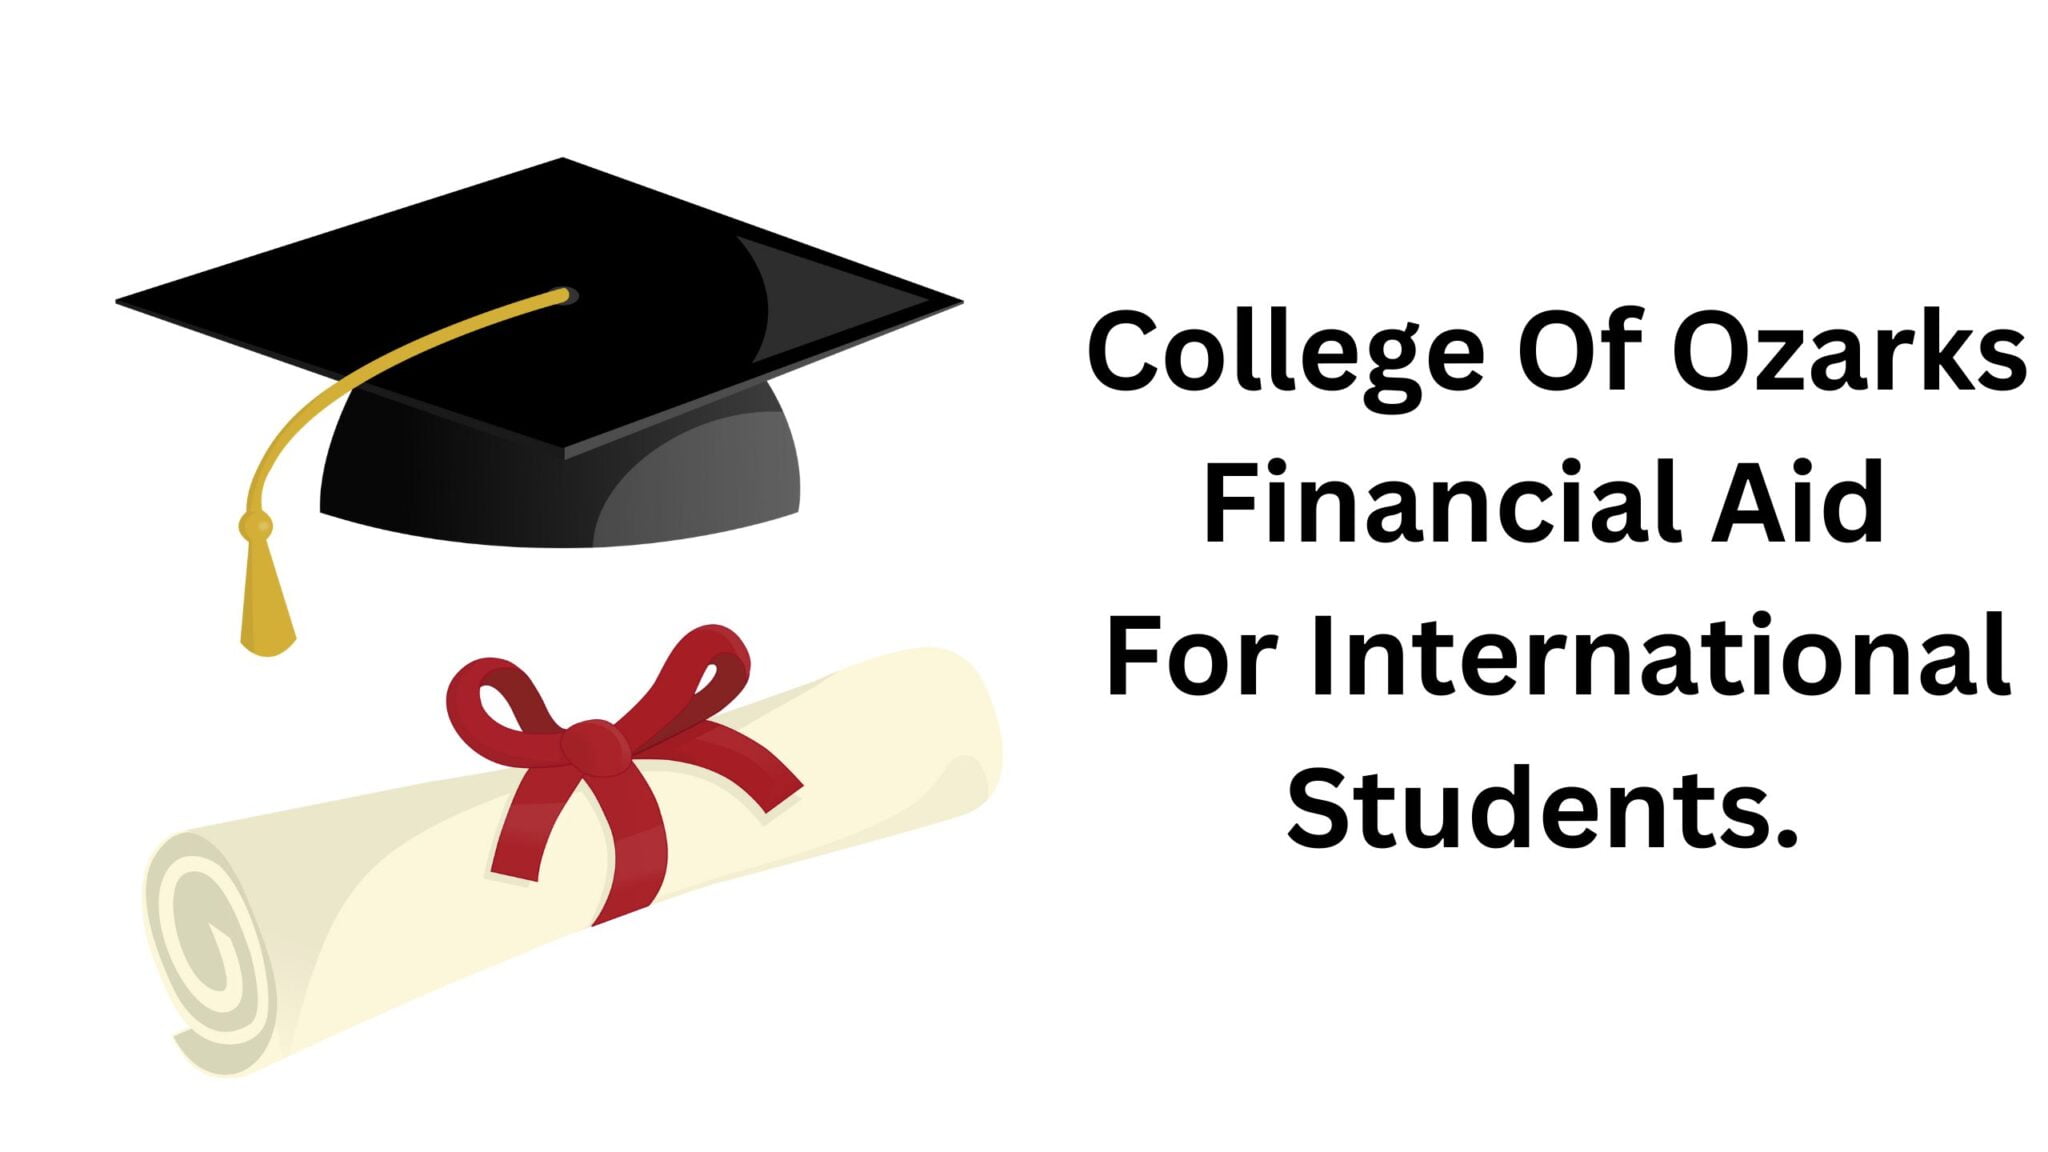 College Of Ozarks Financial Aid For International Students.